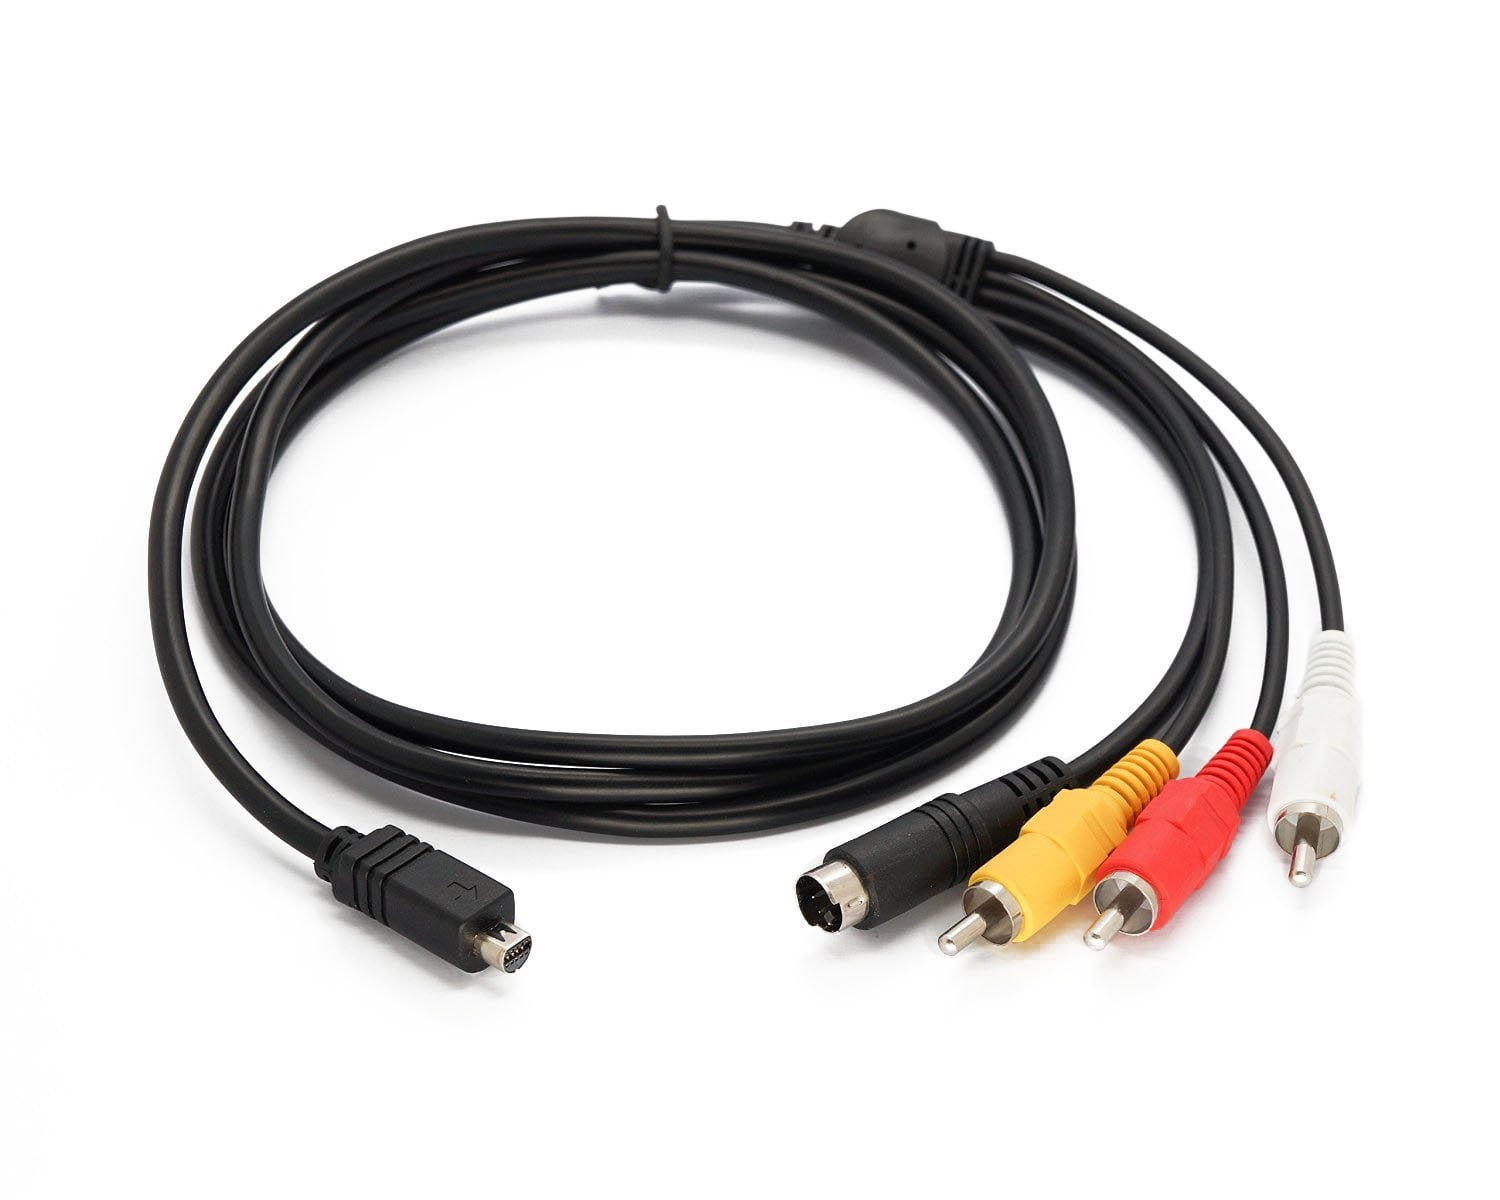 VMC-15FS Compatible AV TV-Out Audio Video cable Cord For Camcorder HandyCam